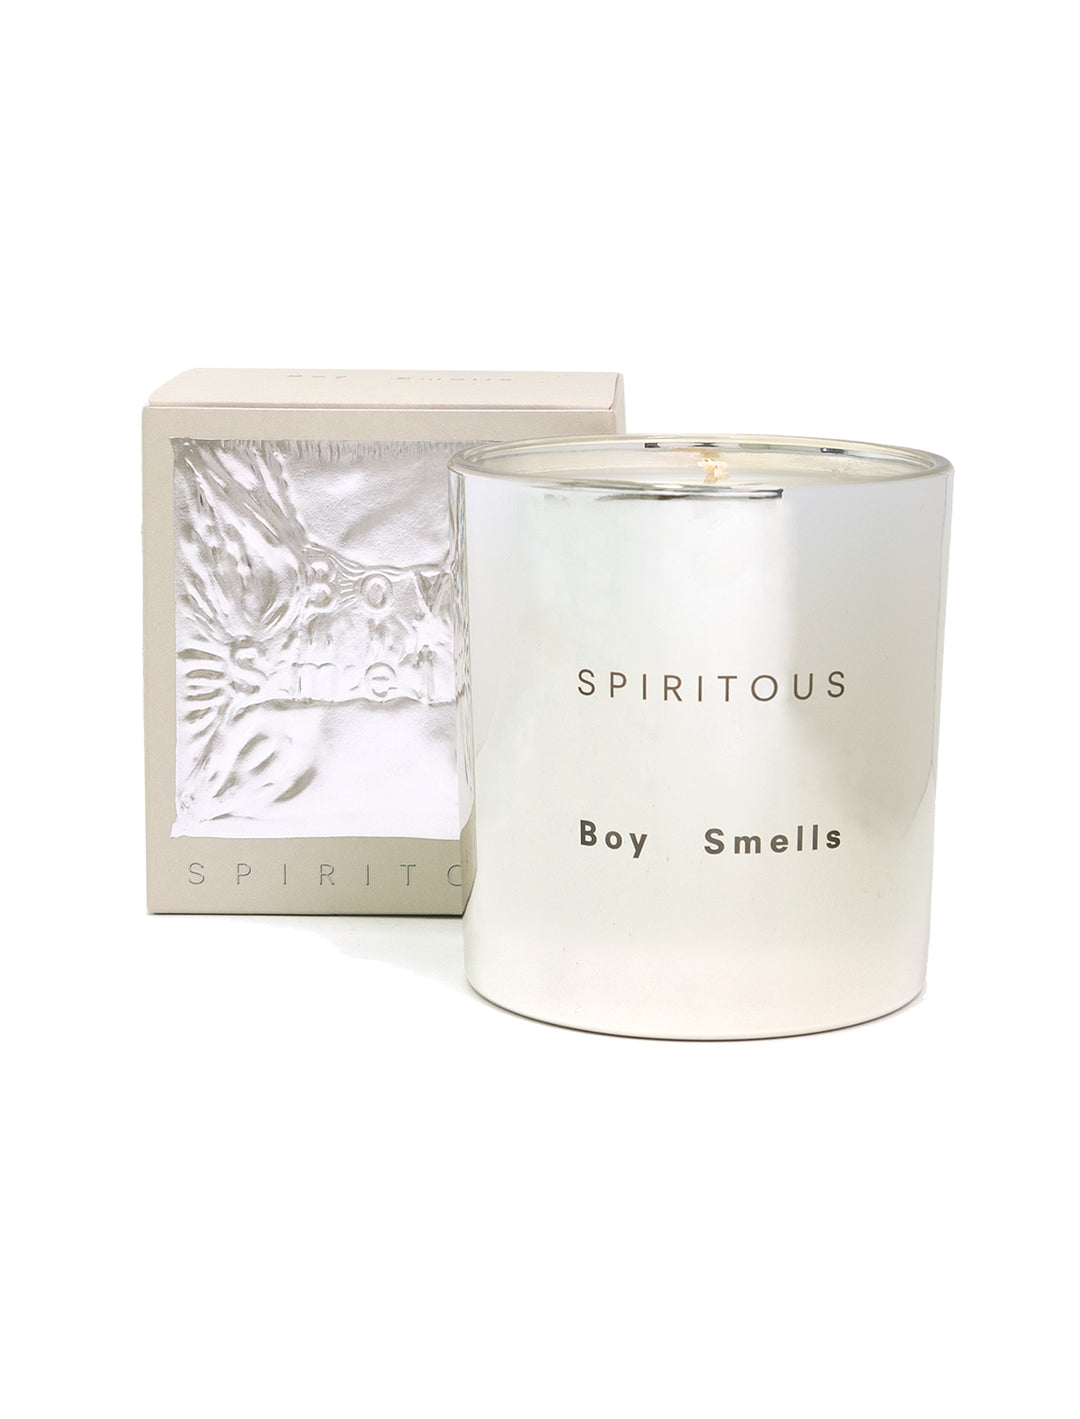 Boy Smells' spiritous candle packaging photo.